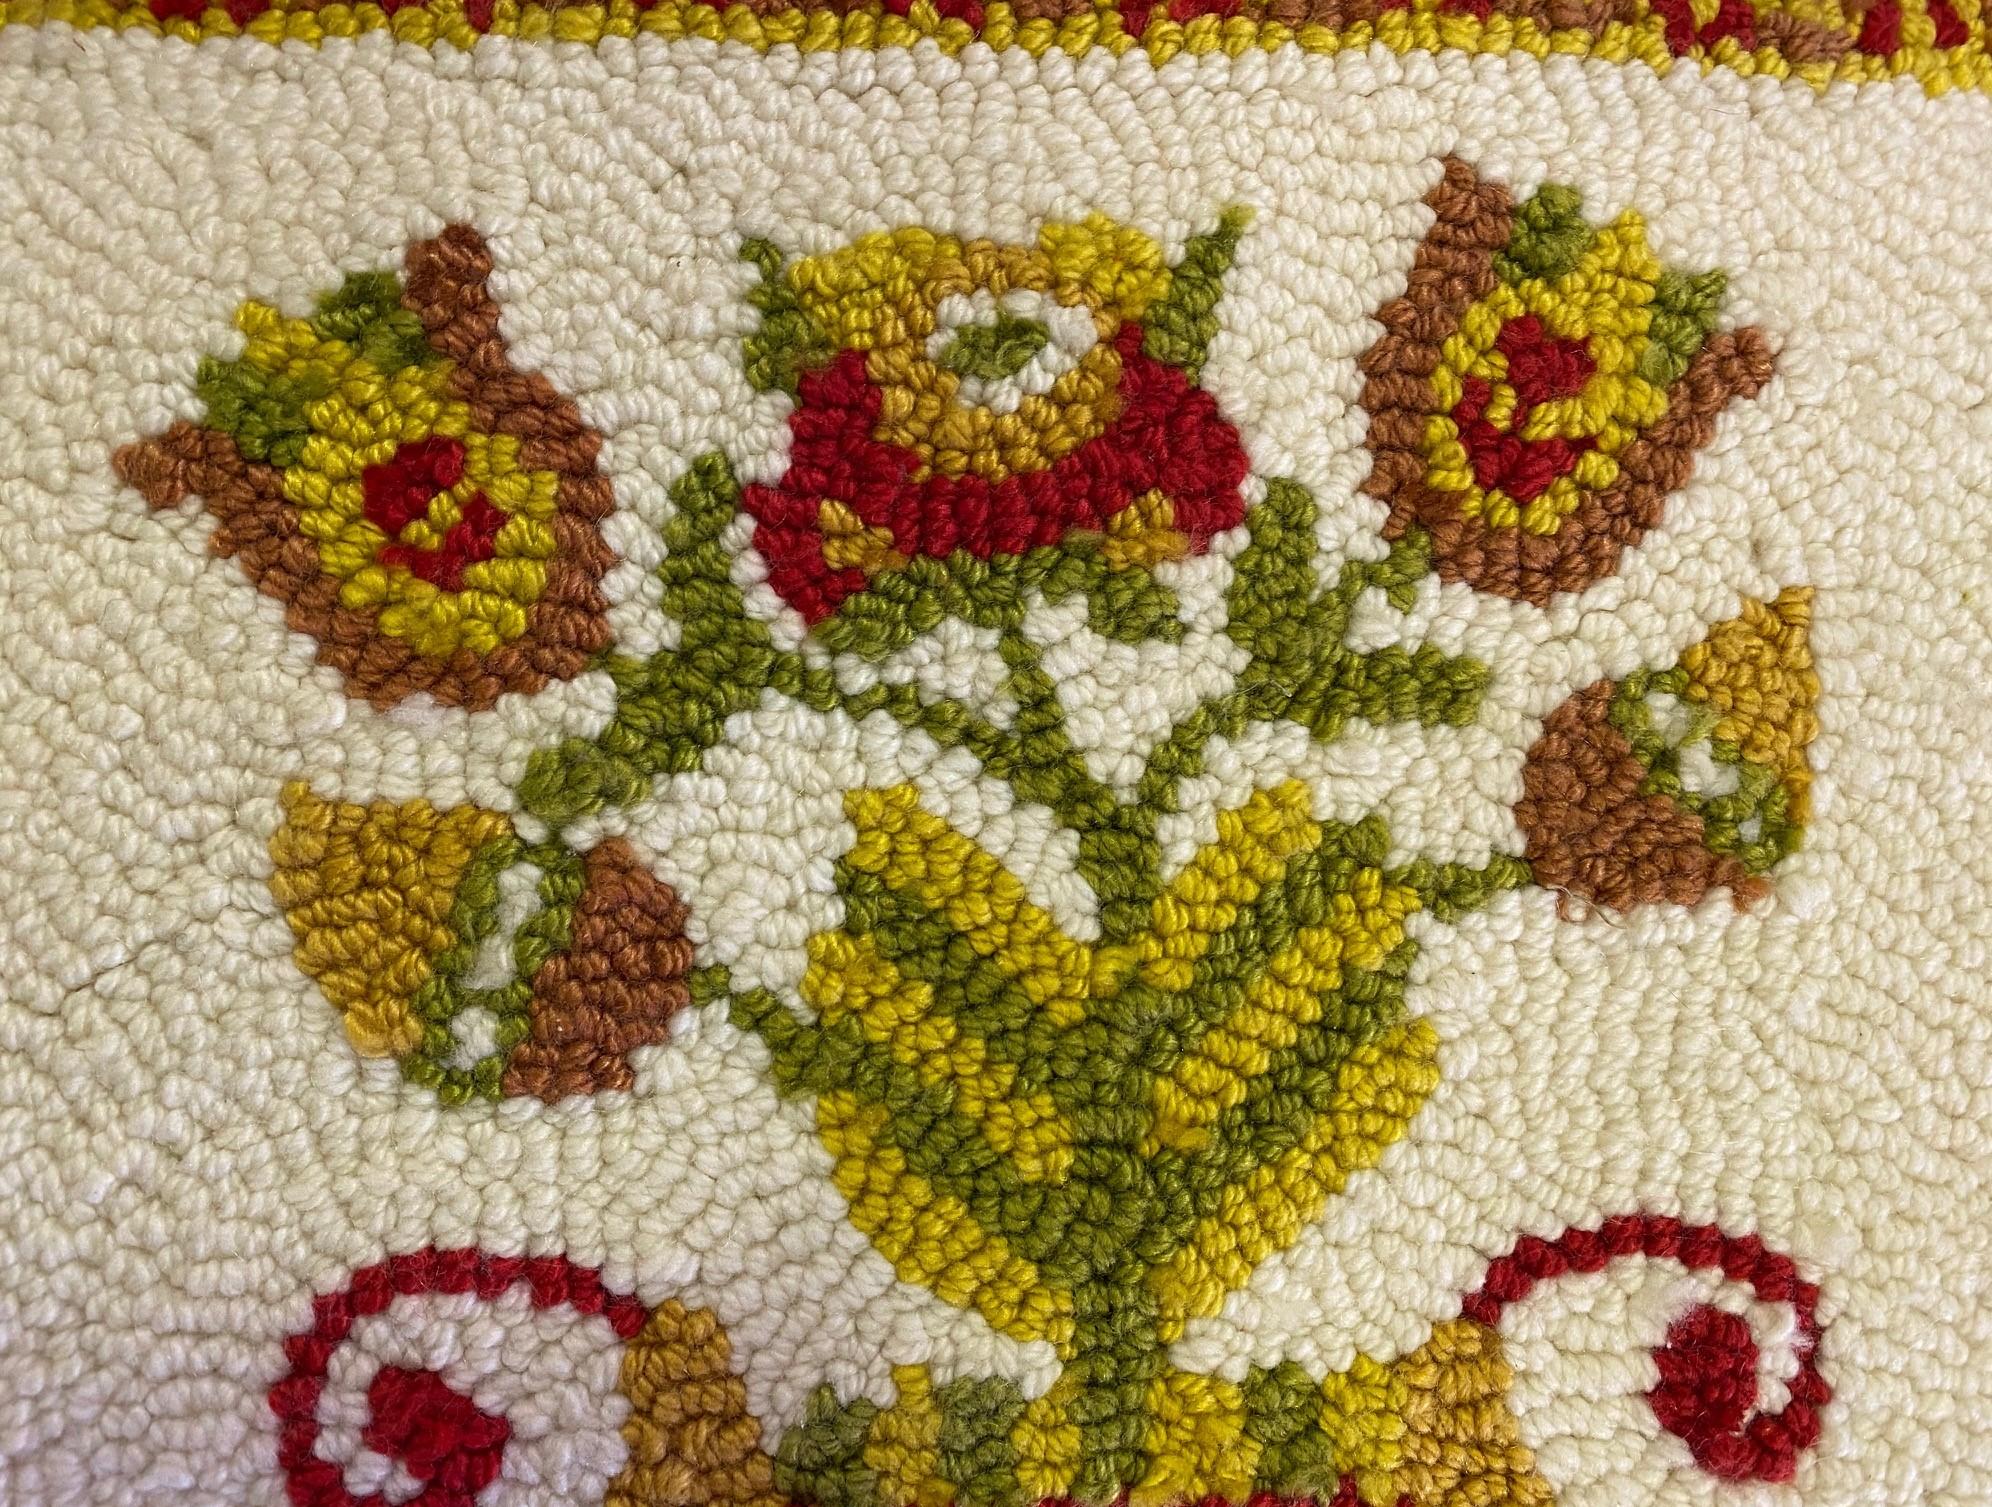 Hand-Woven Evelyn Ackerman ERA Signed Mid-Century Modern Woven Floral Tapestry Wall Hanging For Sale